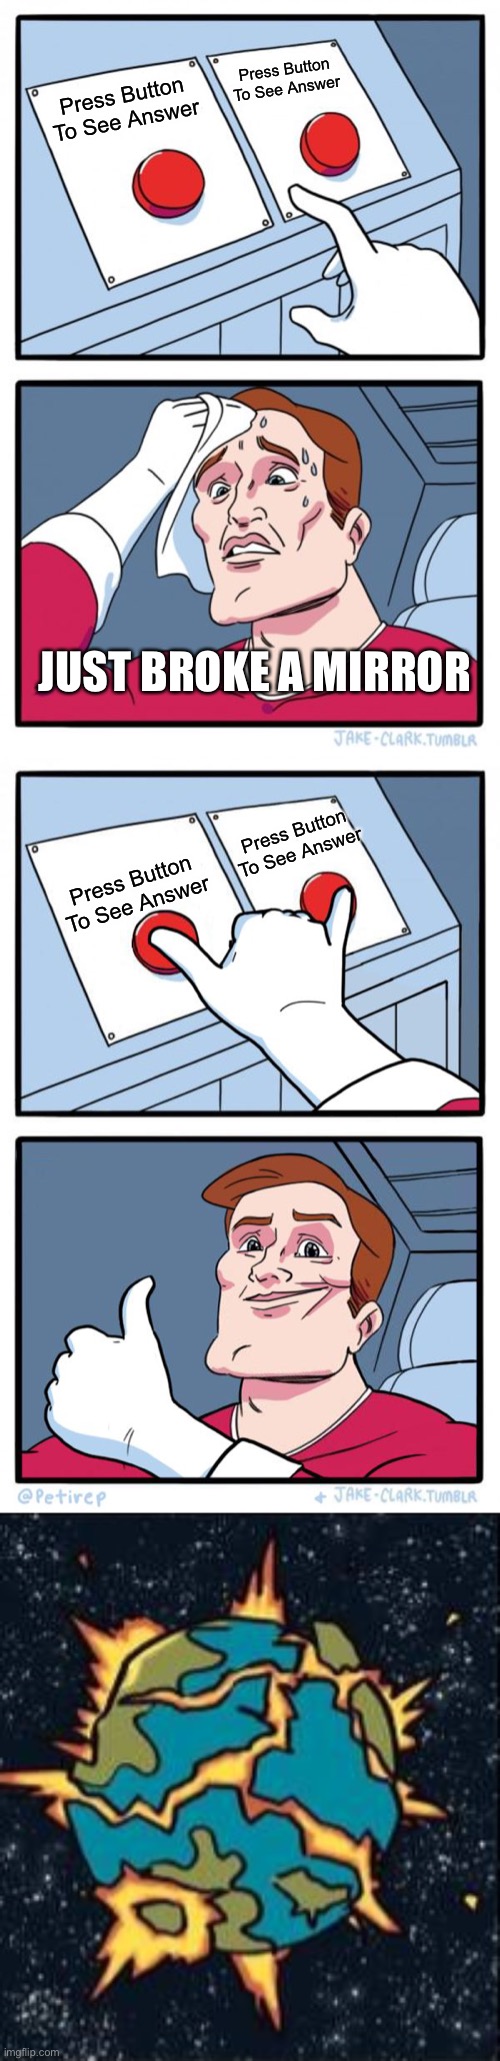 bad luck 7 years | Press Button To See Answer; Press Button To See Answer; JUST BROKE A MIRROR; Press Button To See Answer; Press Button To See Answer | image tagged in memes,two buttons,both buttons pressed,god blows up the earth | made w/ Imgflip meme maker